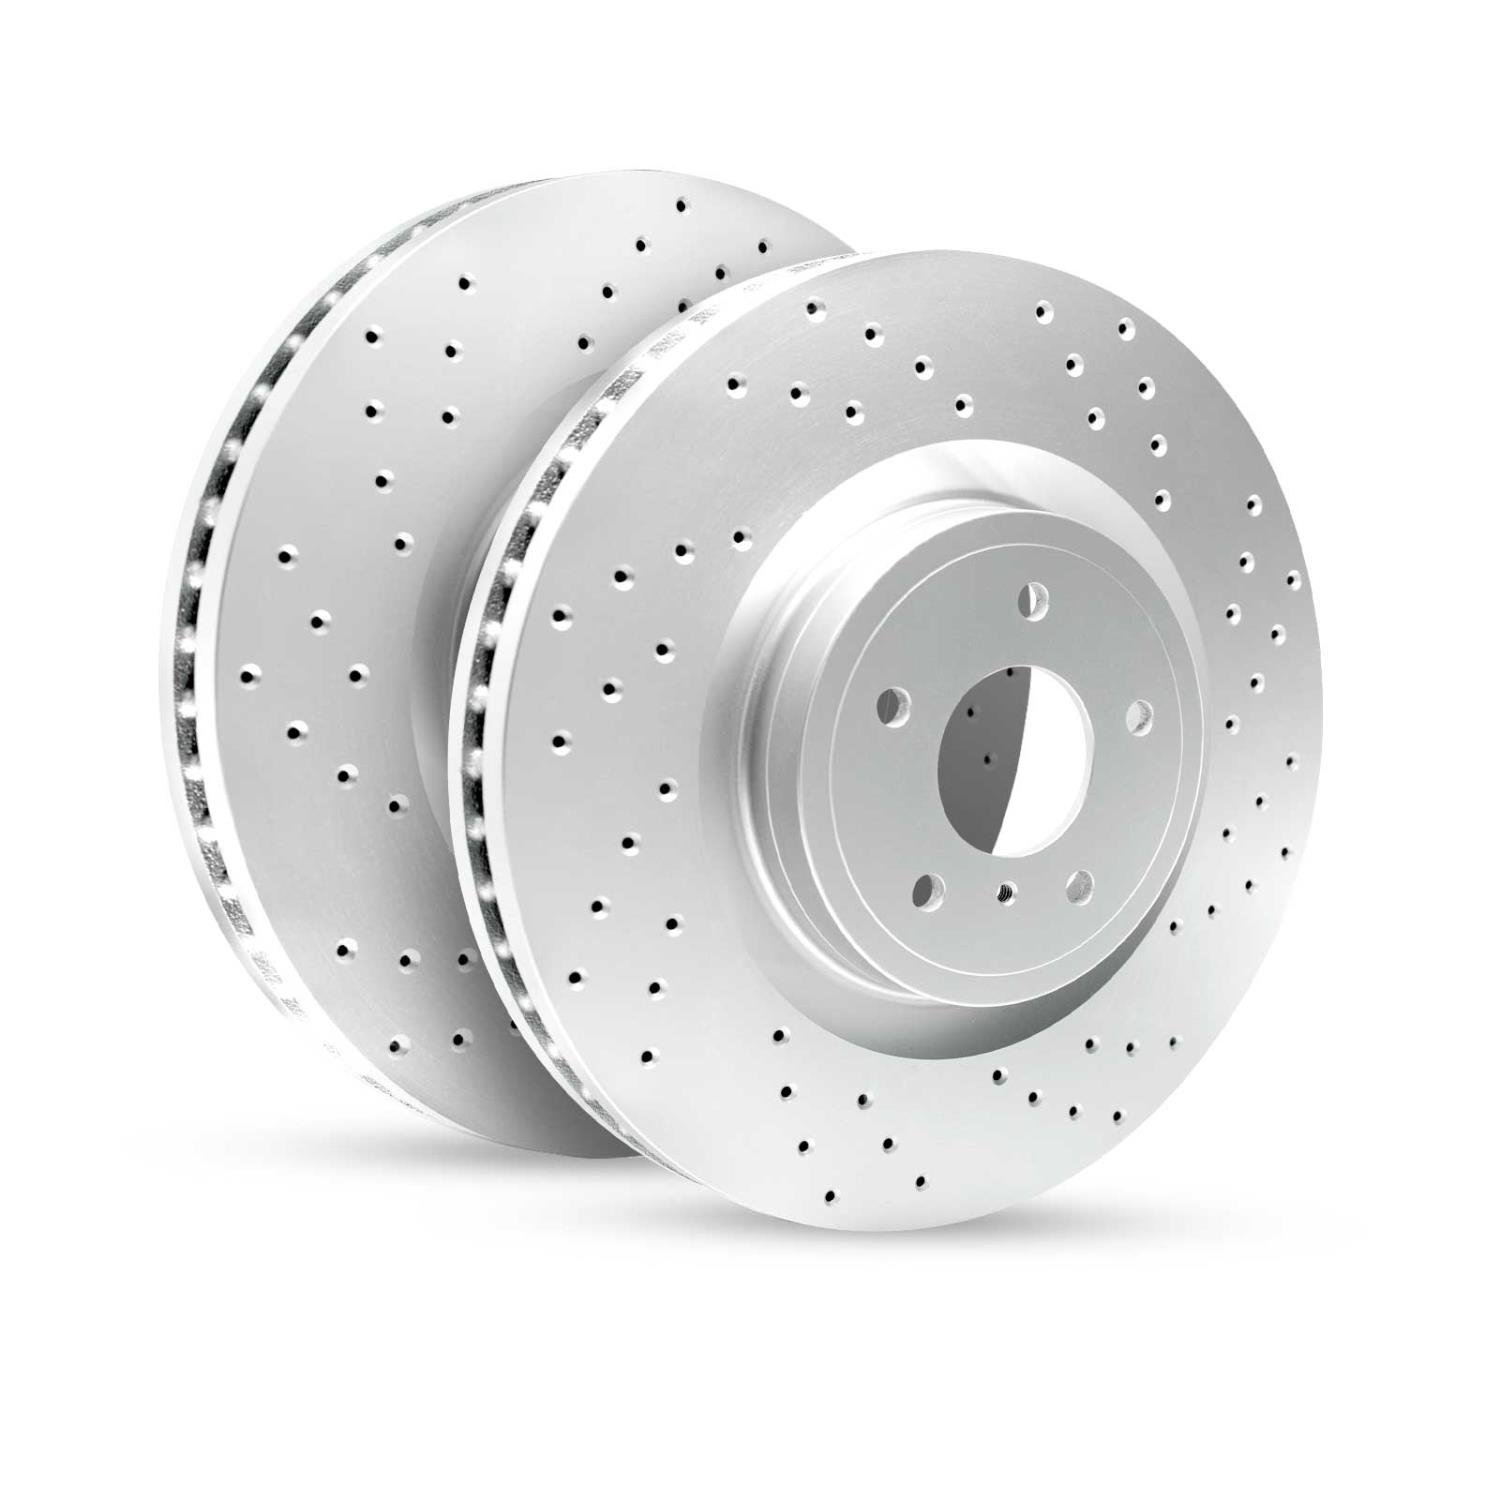 GEO-Carbon Drilled/Slotted Rotors, 2003-2008 BMW, Position: Rear